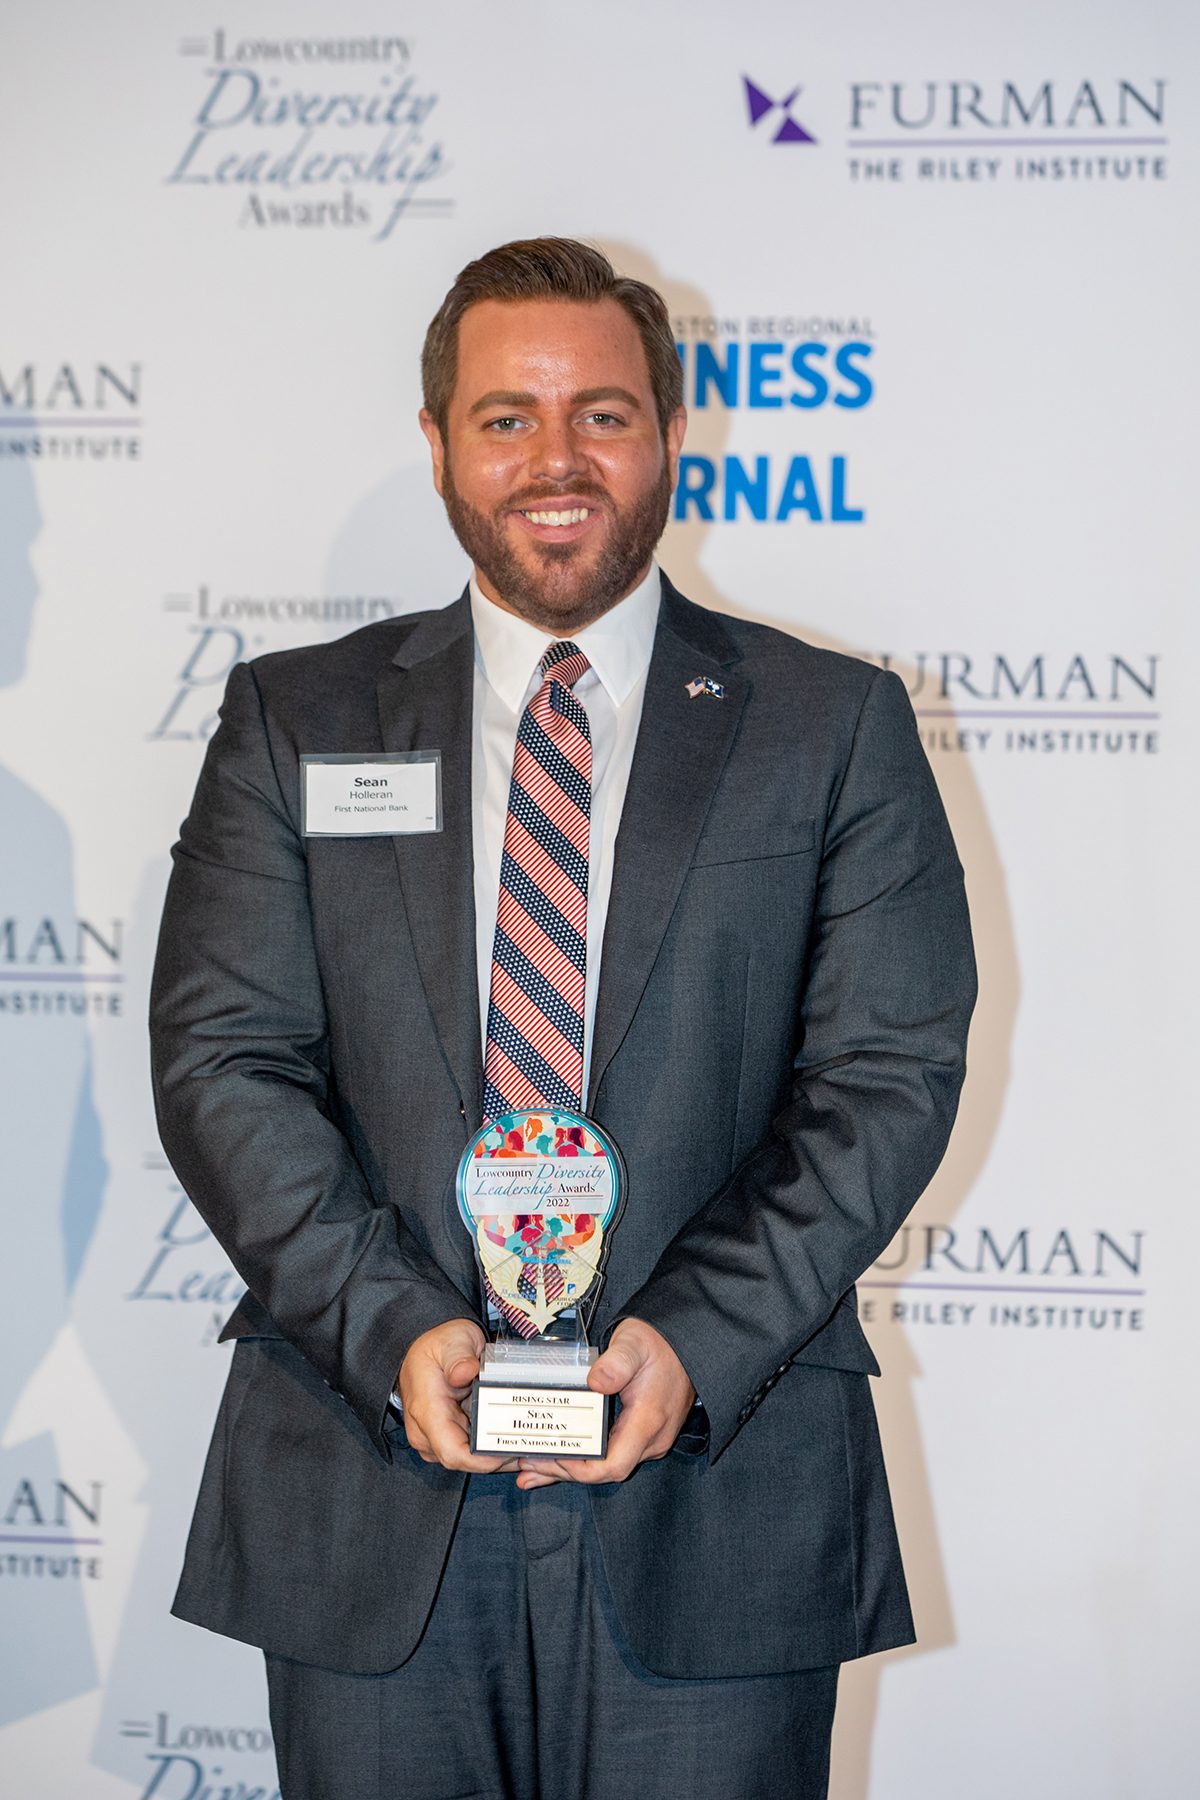 Sean Holleran, vice president of retail and small business banking, First National Bank (Young Professional/Rising Star)